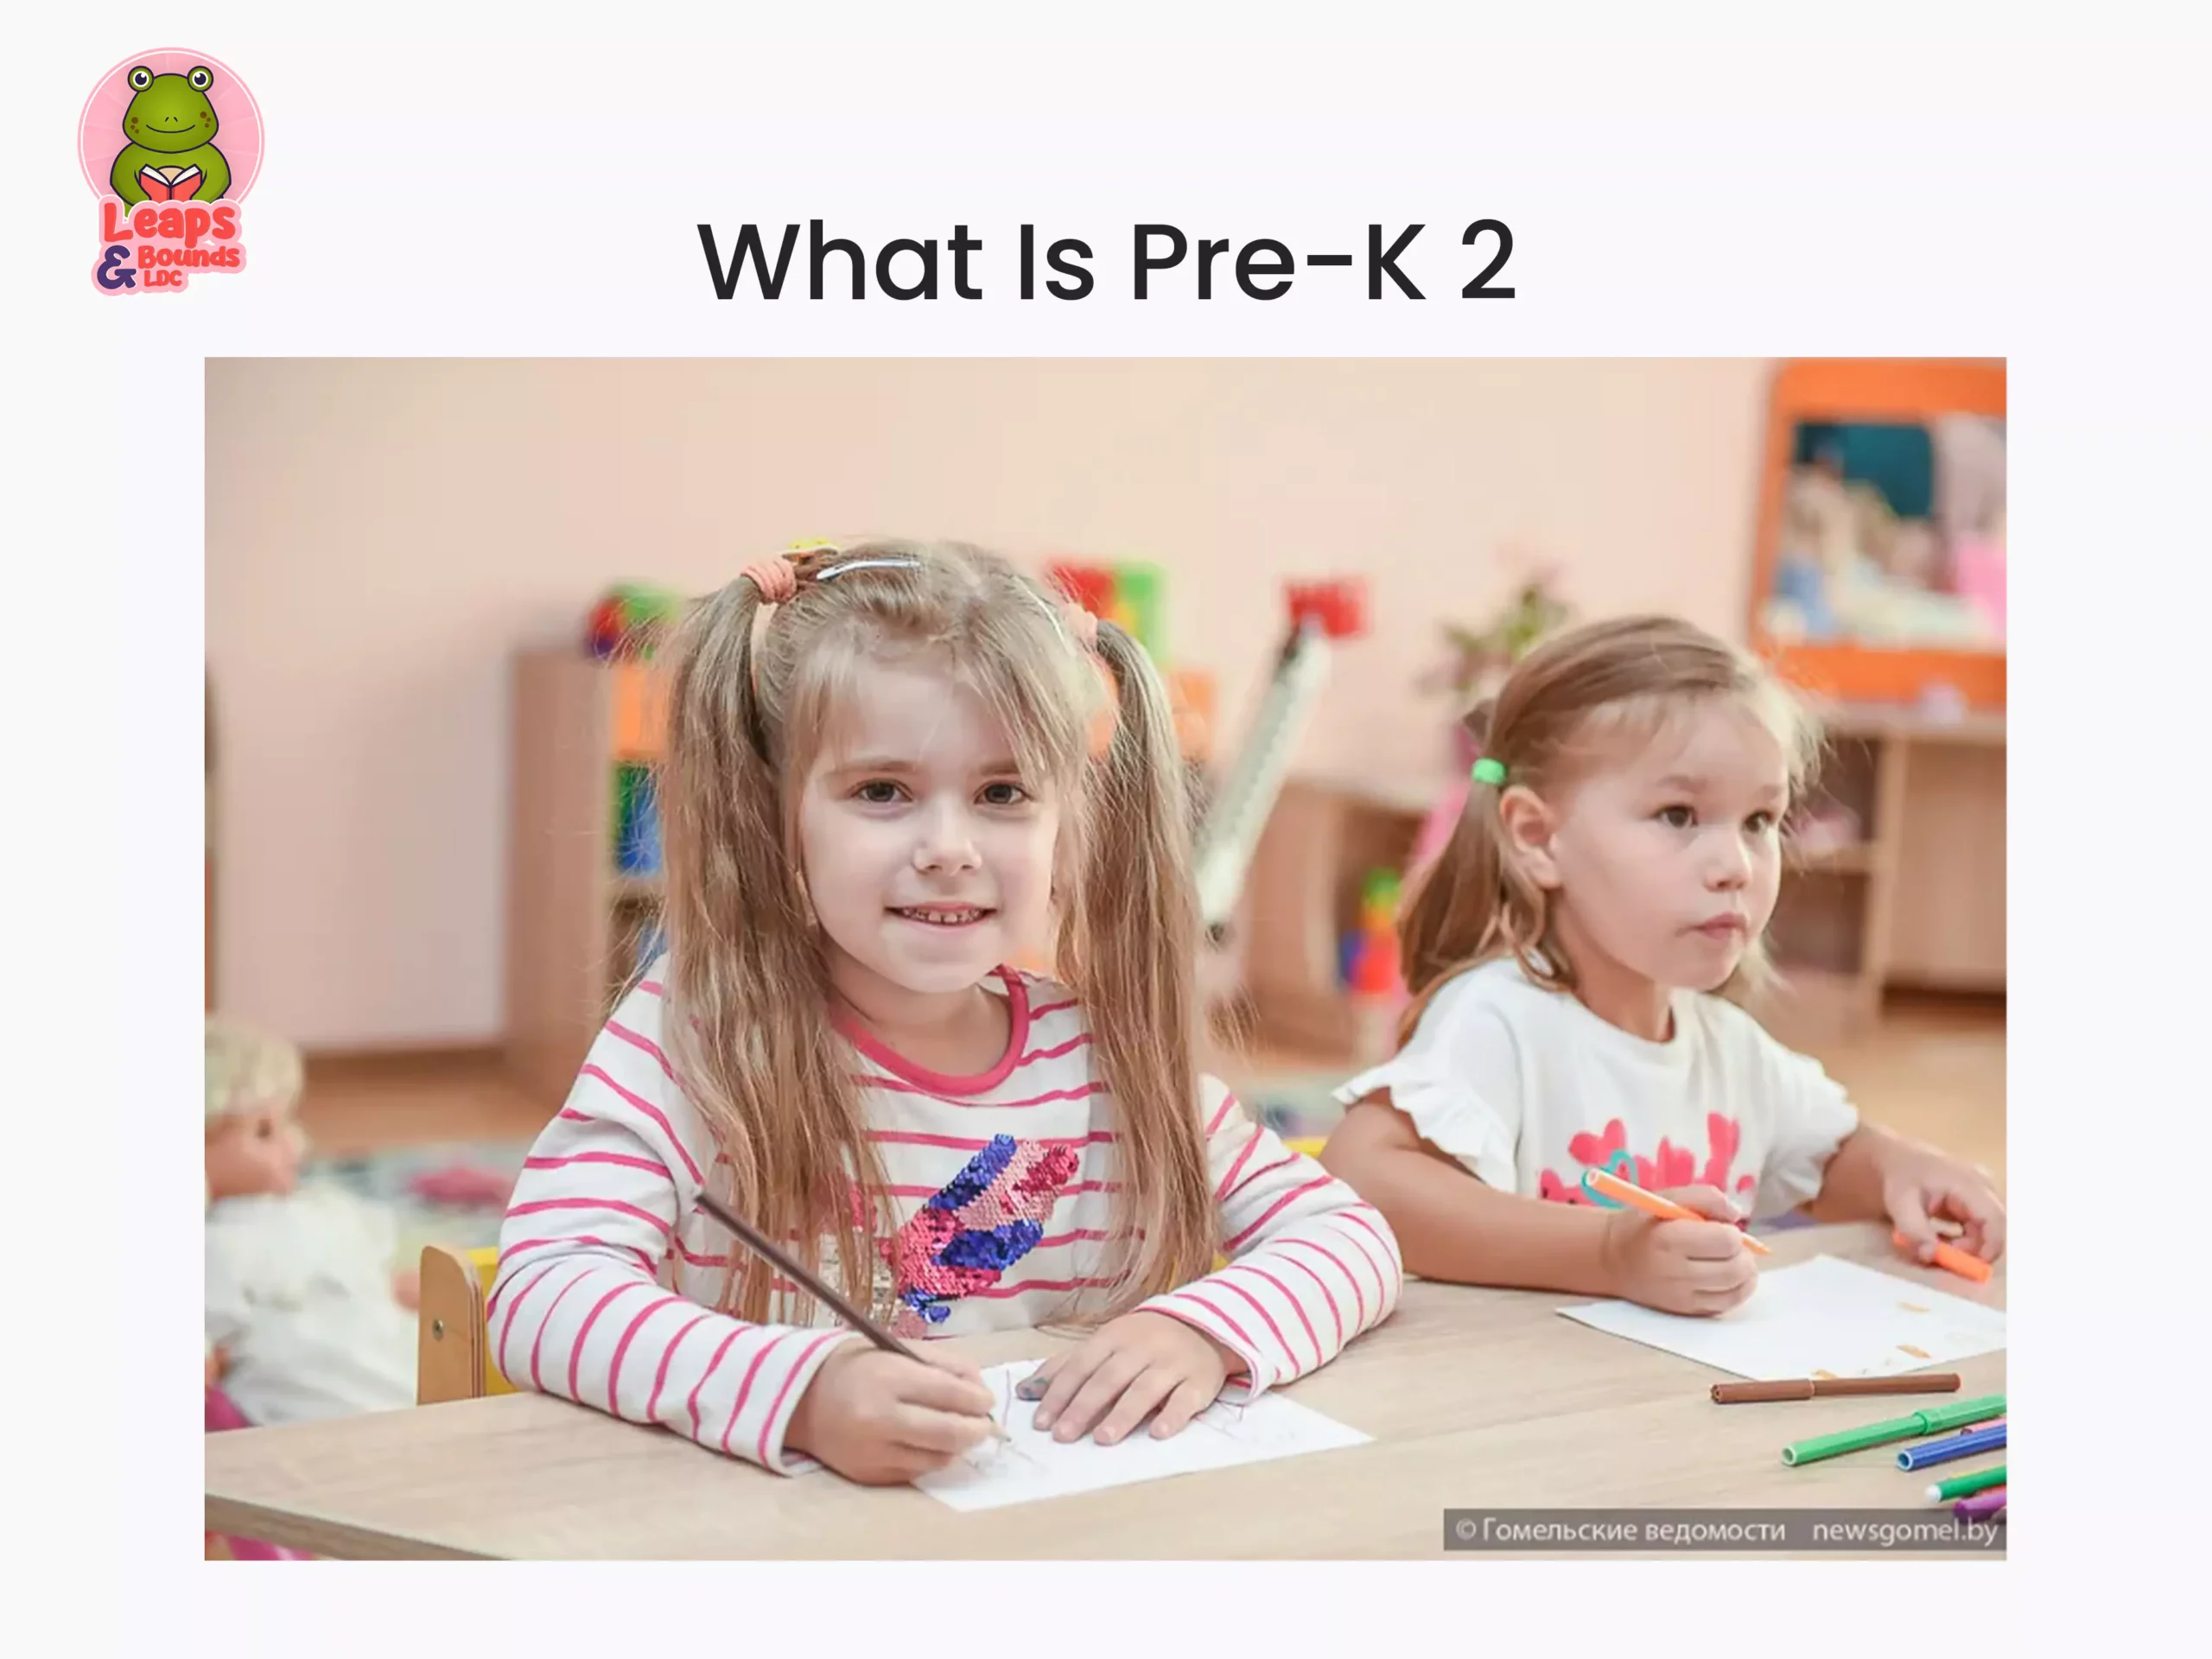 What Is Pre-K 2